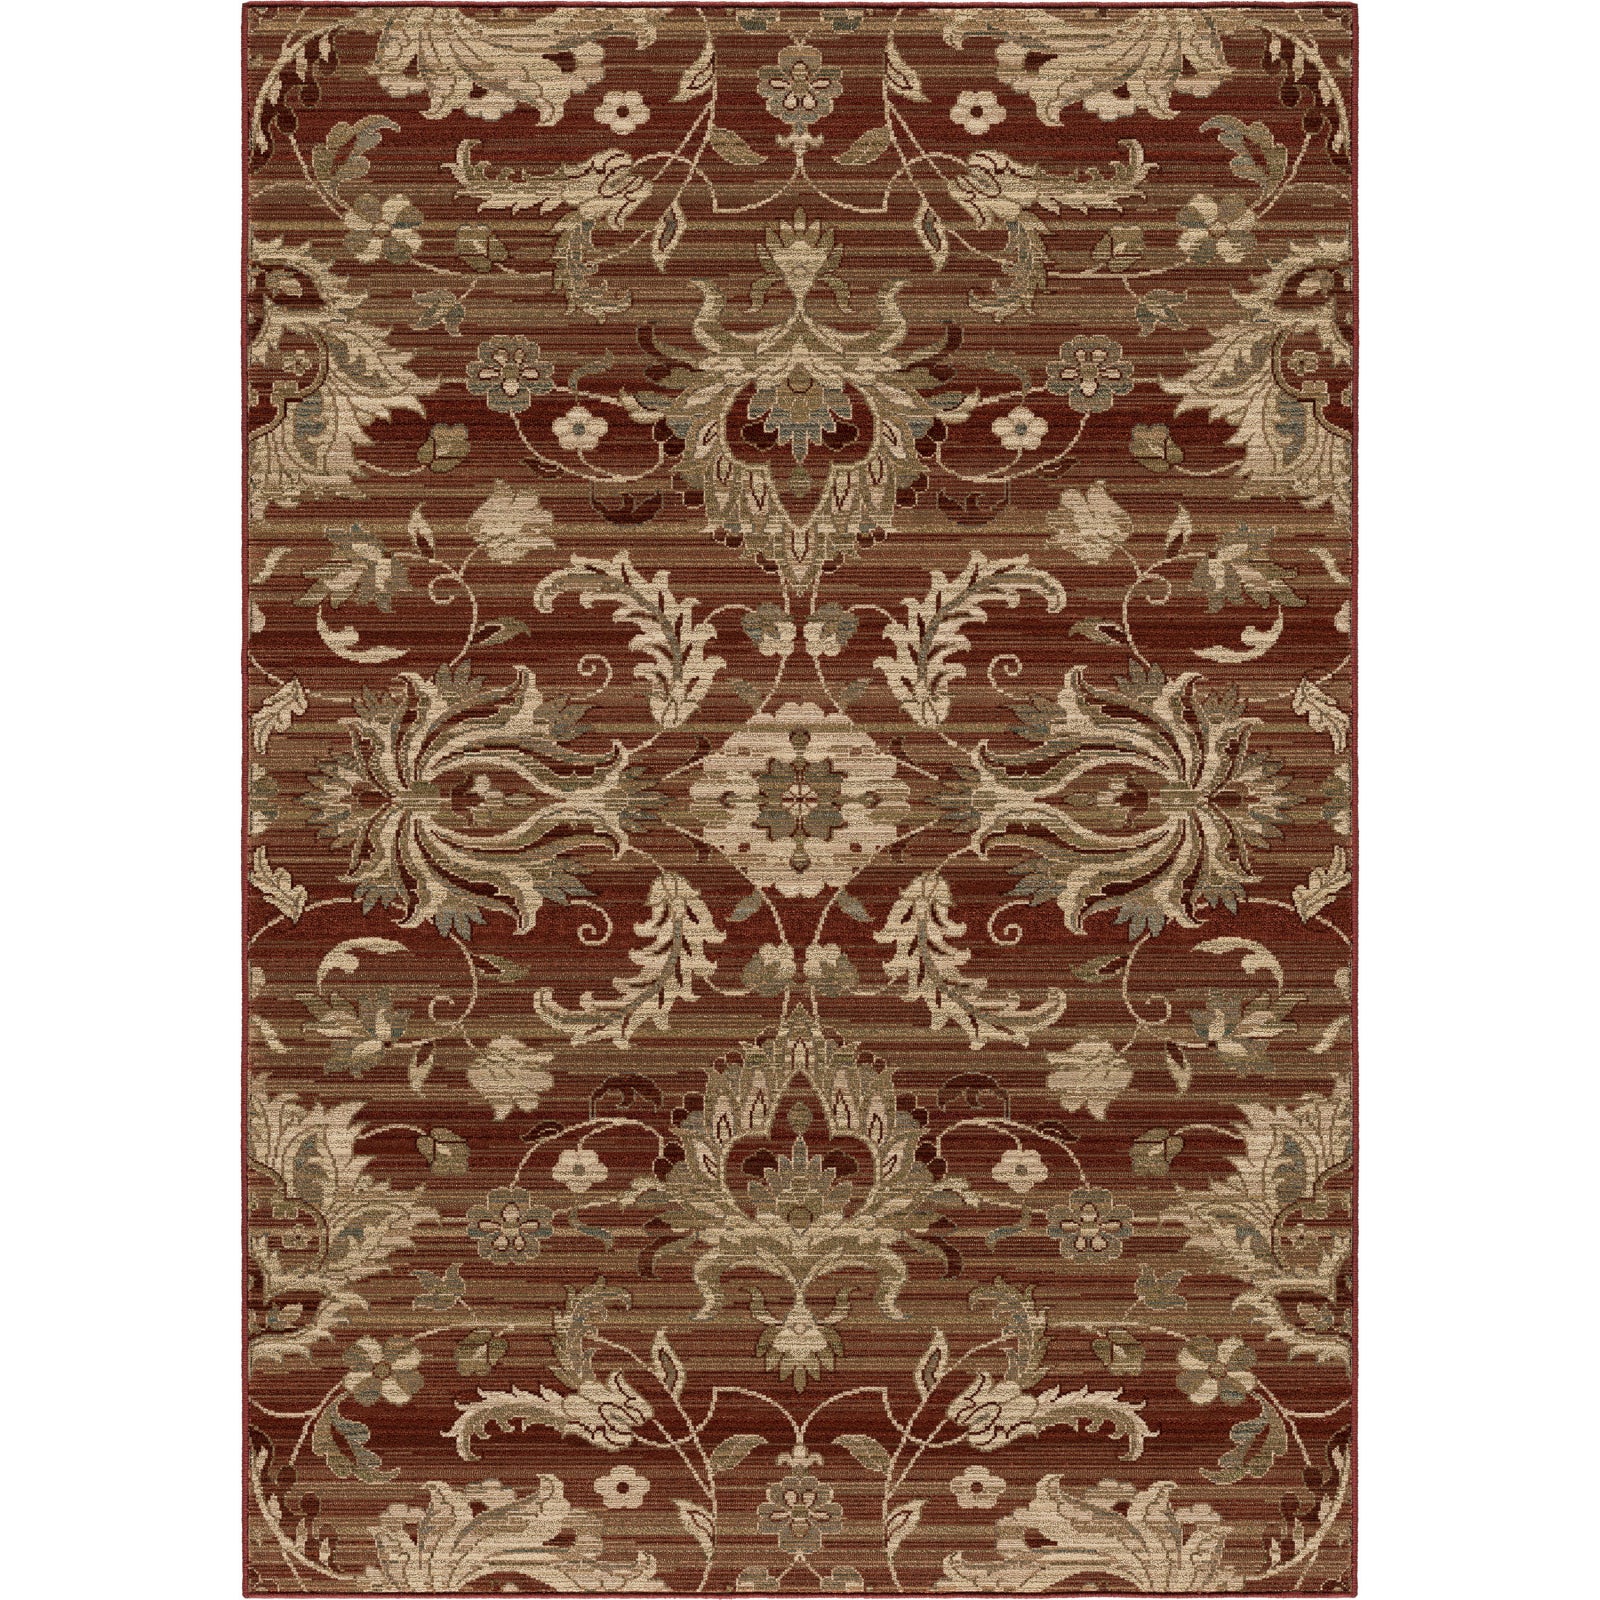 Orian Rugs Virtuous Stoke Red Area Rug main image